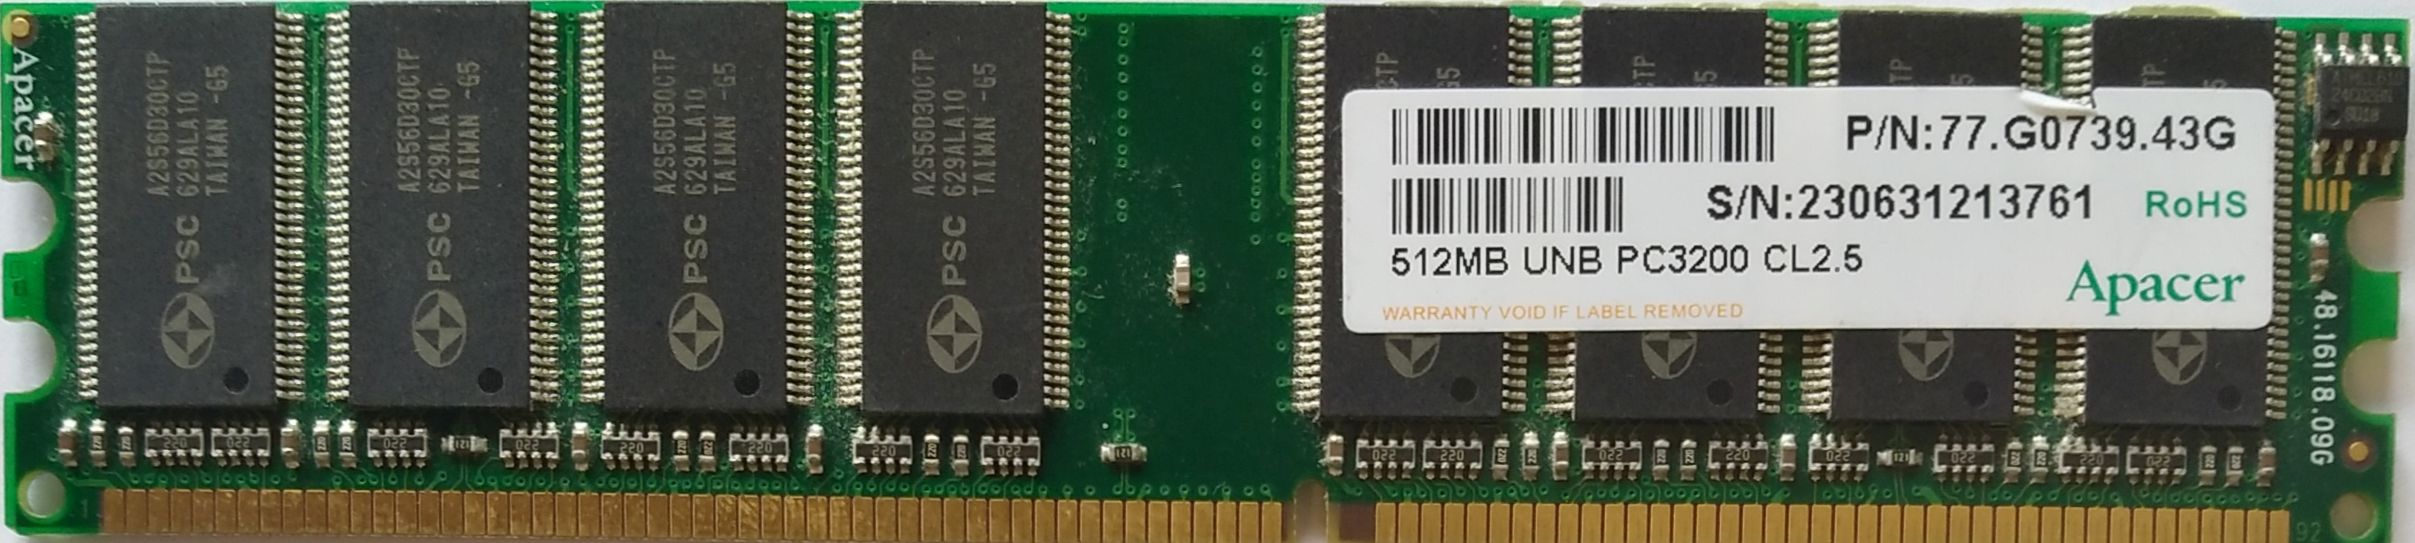 DDR 512MB 400Mhz-PC3200 / Apacer 77.G0739.43G